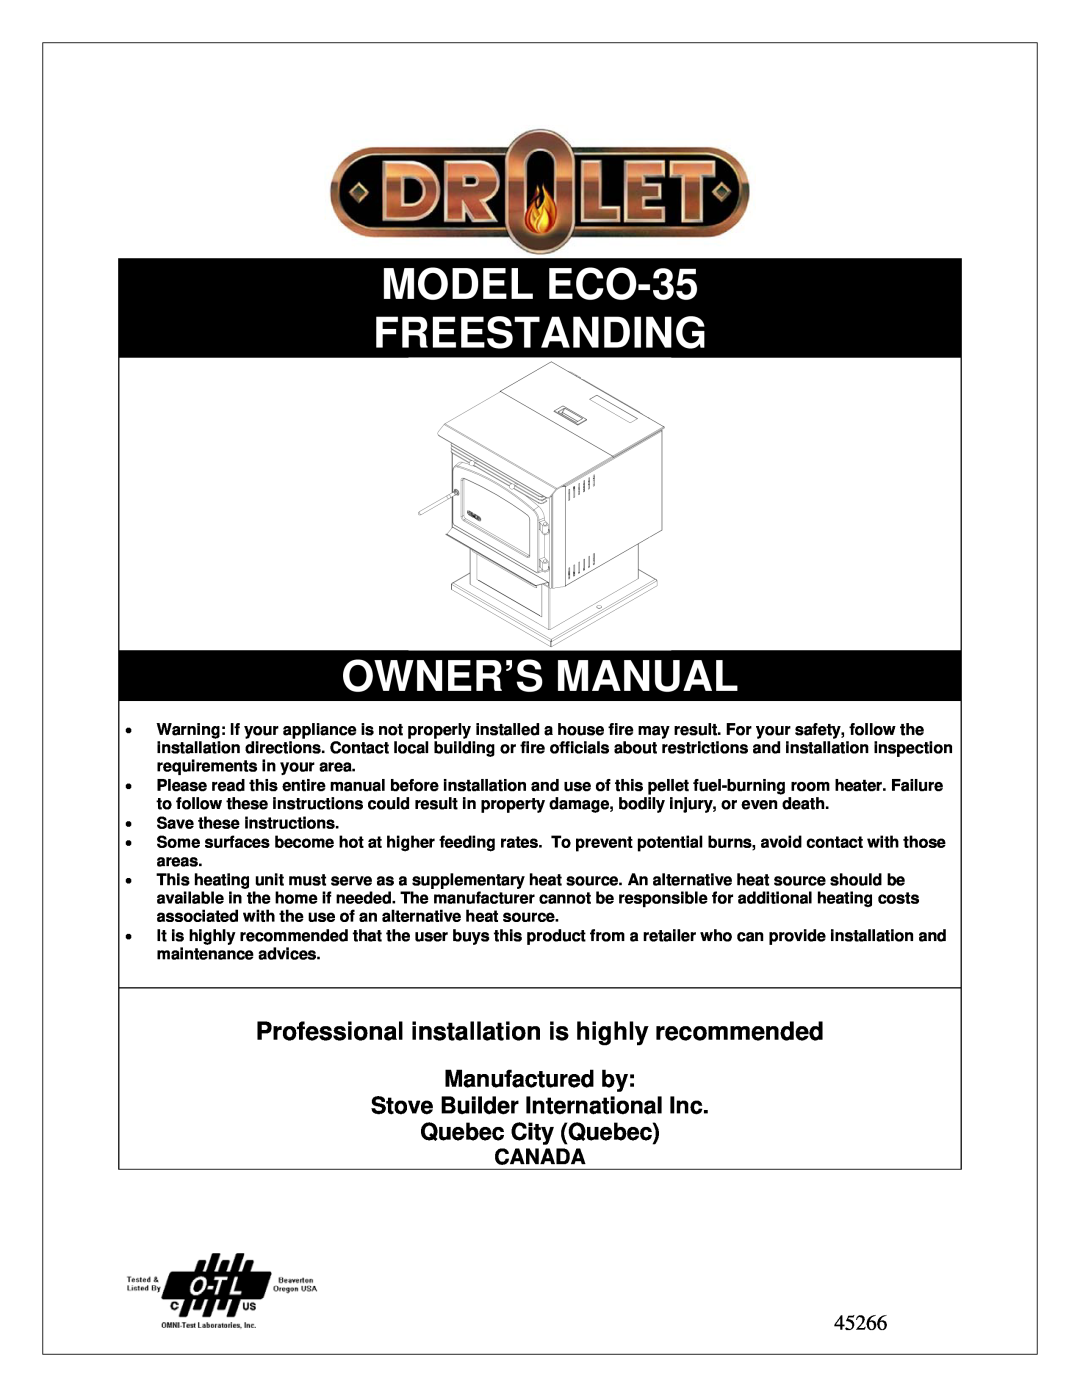 Drolet owner manual Canada, MODEL ECO-35 FREESTANDING OWNER’S MANUAL, Professional installation is highly recommended 